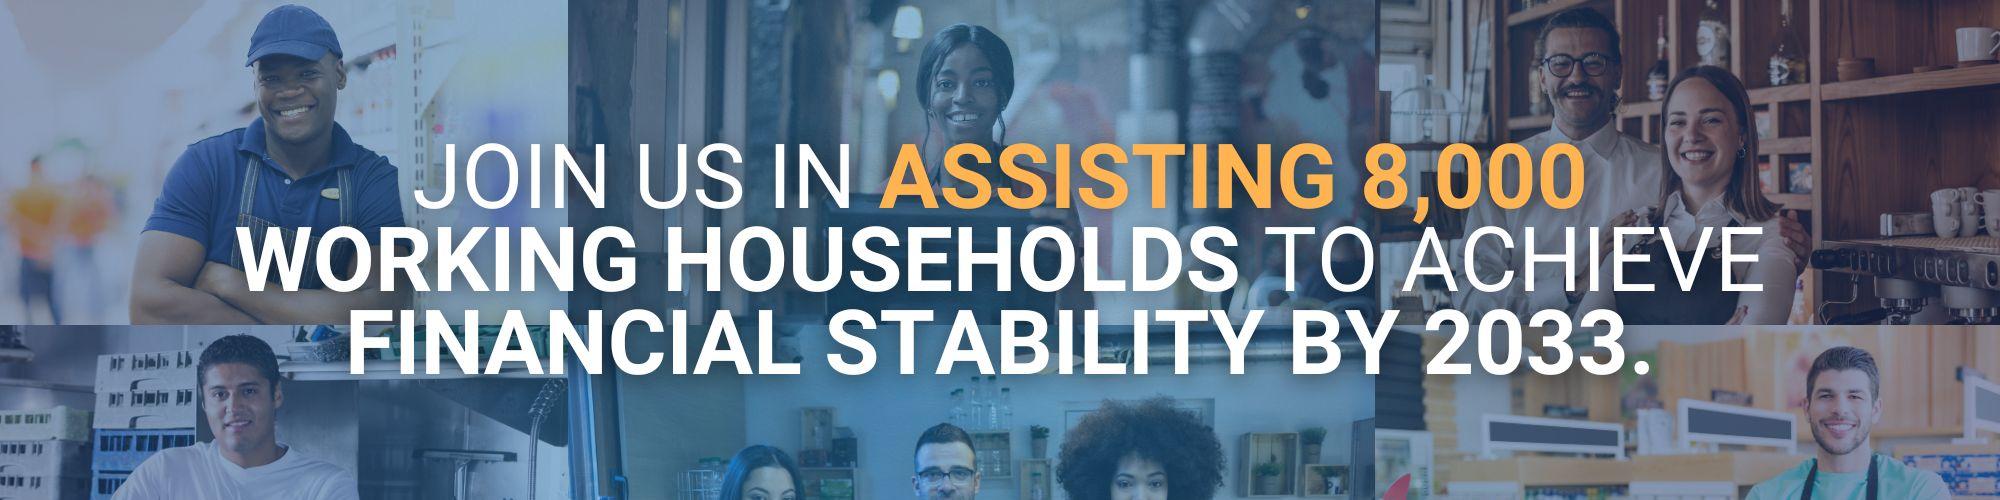 Join us in assisting 8,000 working households to achieve financial stability by 2033